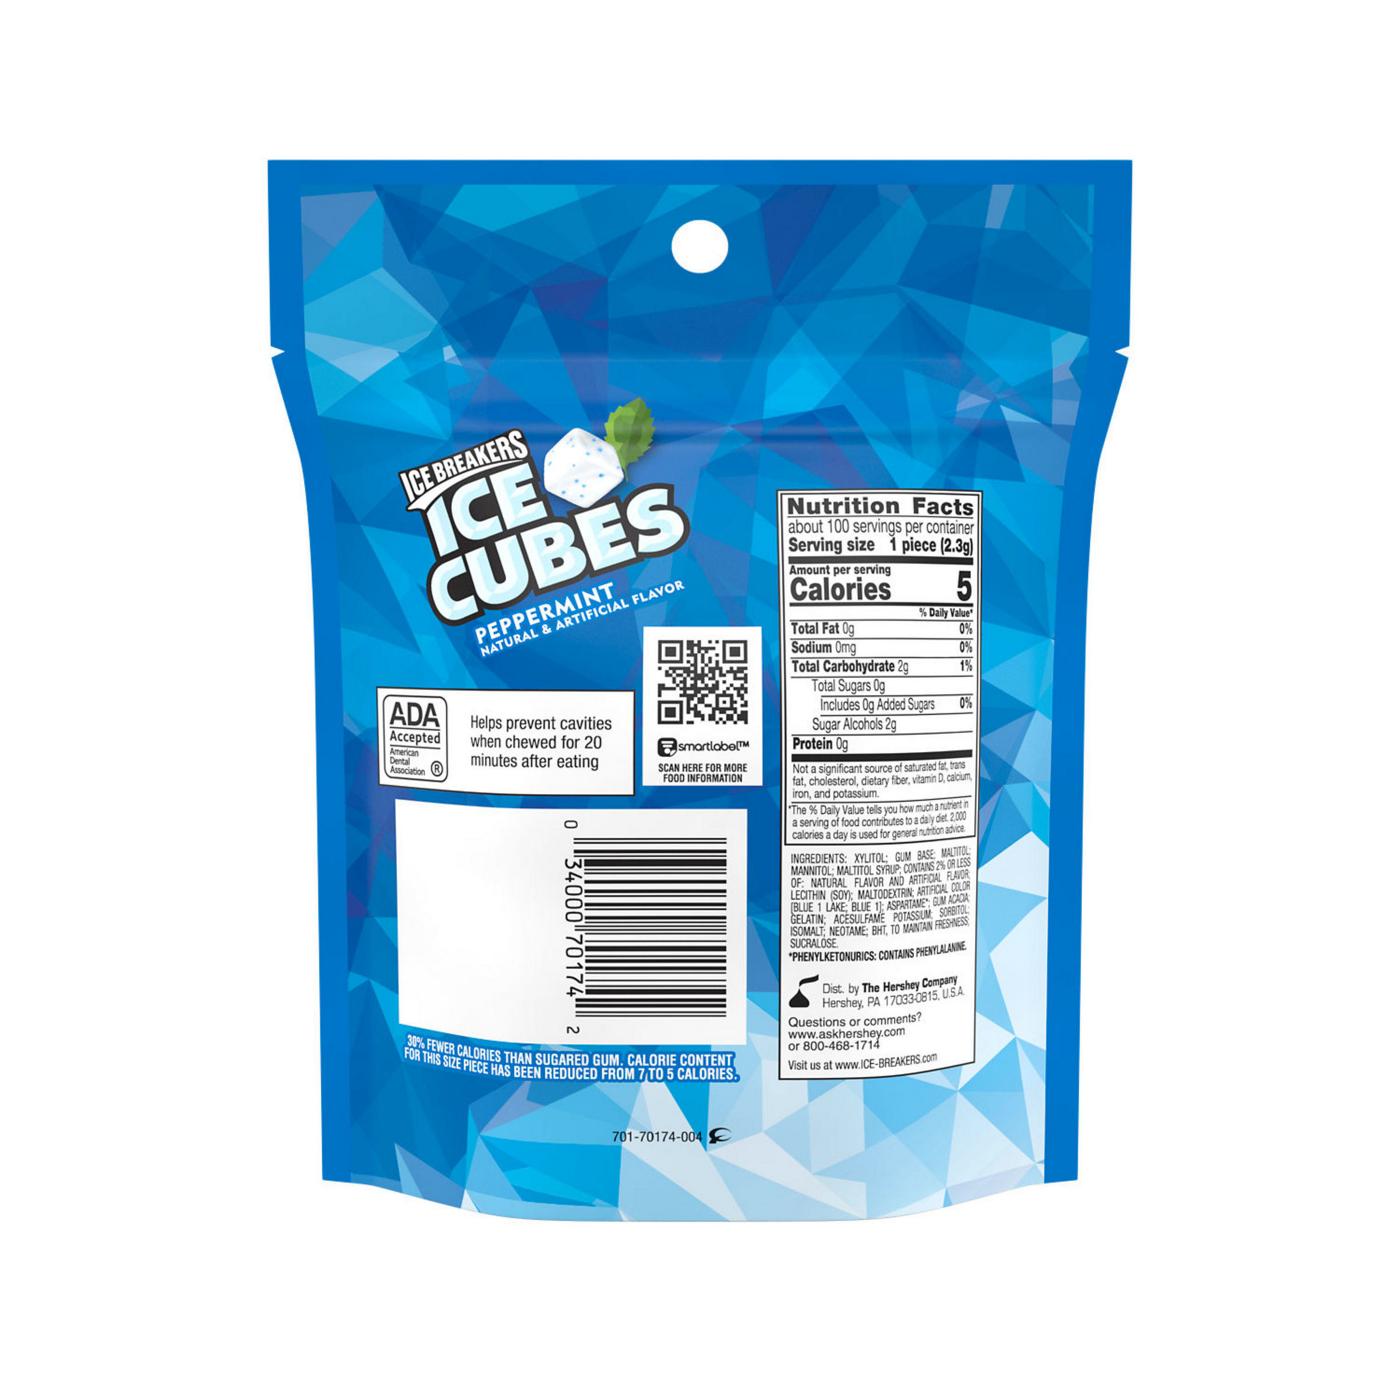 Ice Breakers Ice Cubes Peppermint Sugar Free Chewing Gum; image 7 of 7